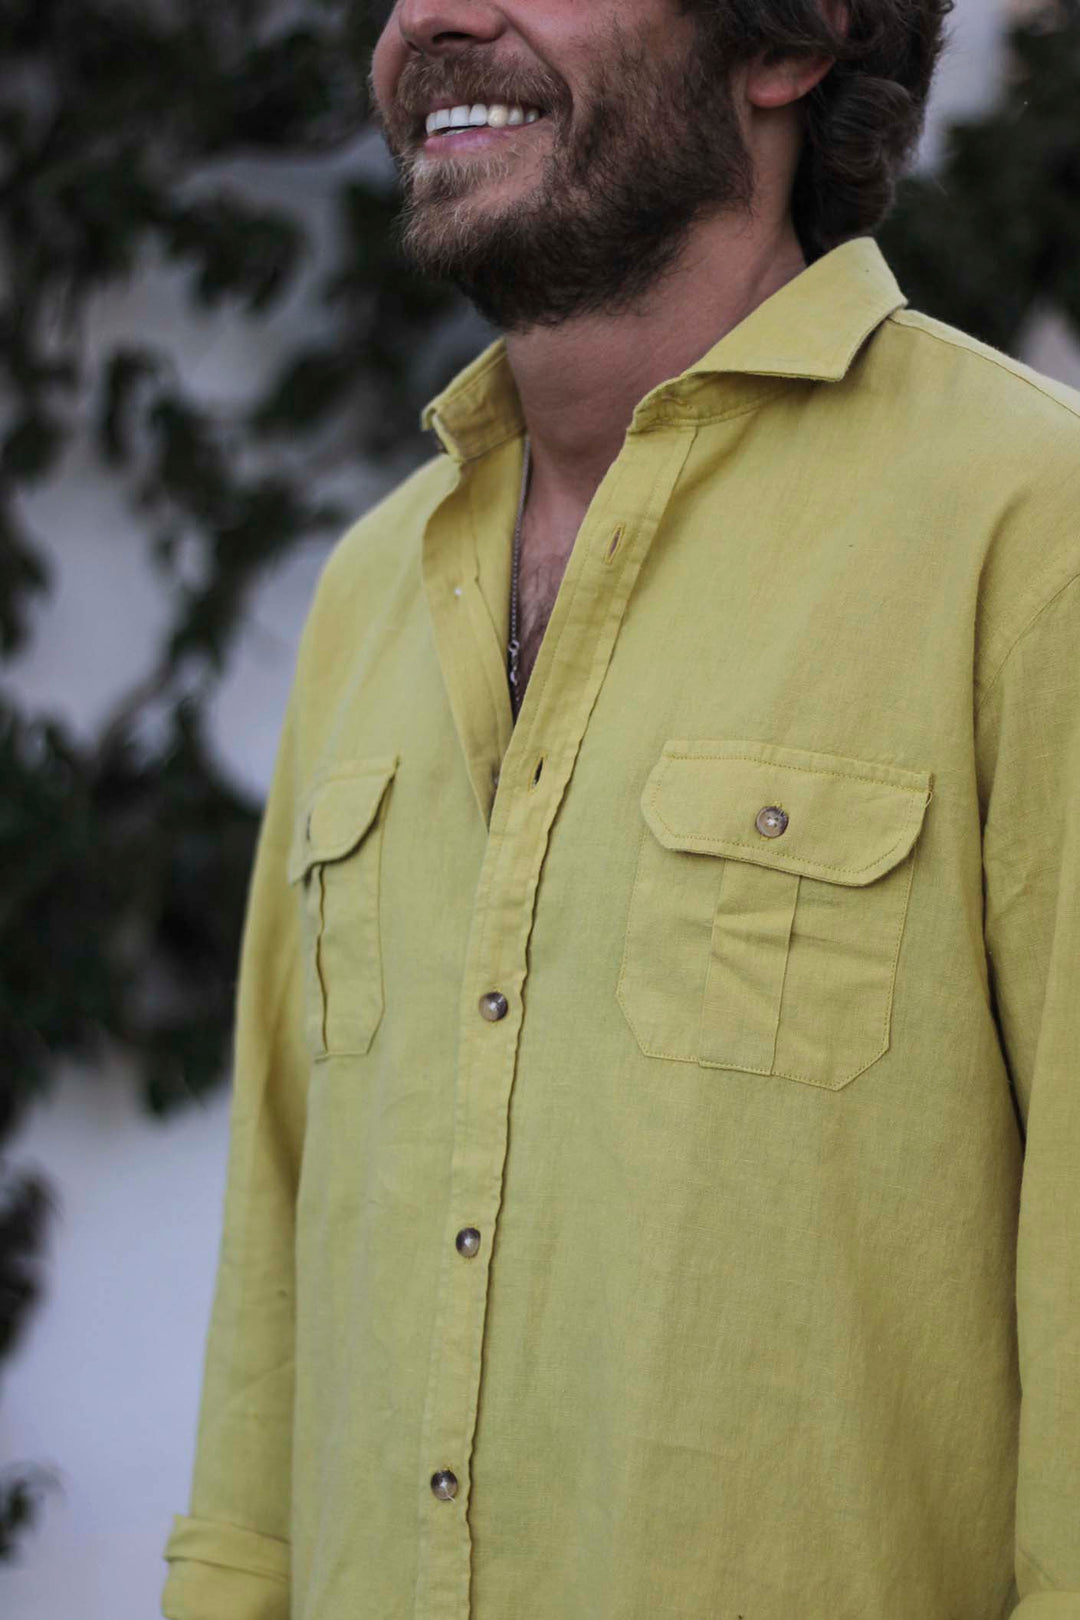 Distressed Mustard Linen Shirt with Double Pocket and Horn Buttons